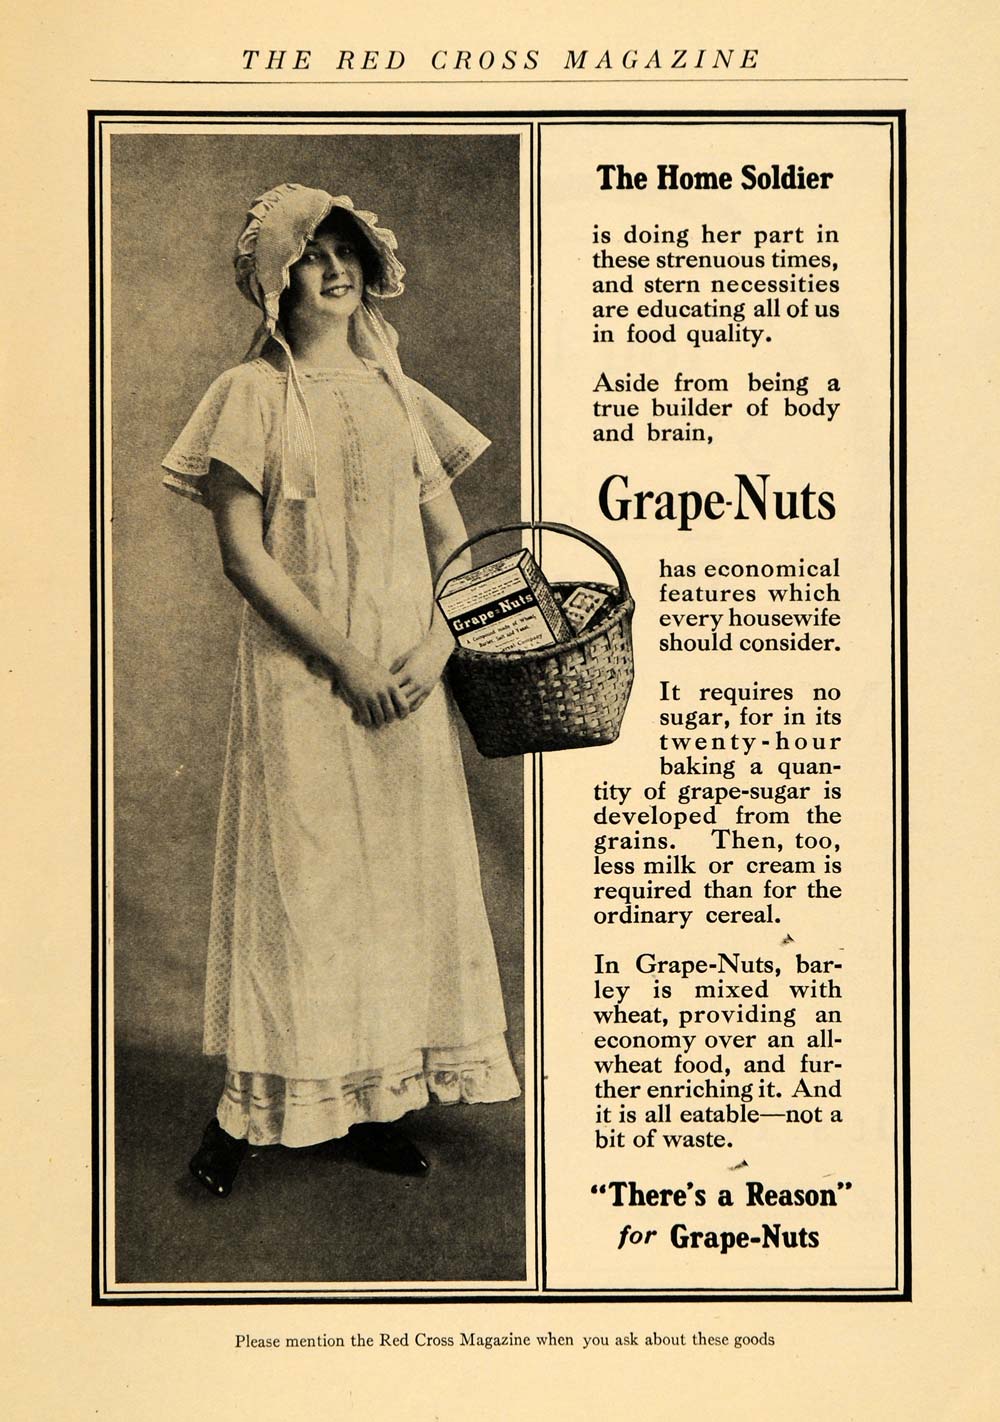 1918 Ad Grape Nuts Cereal WWI Home Economy Soldier Girl - ORIGINAL RCM1